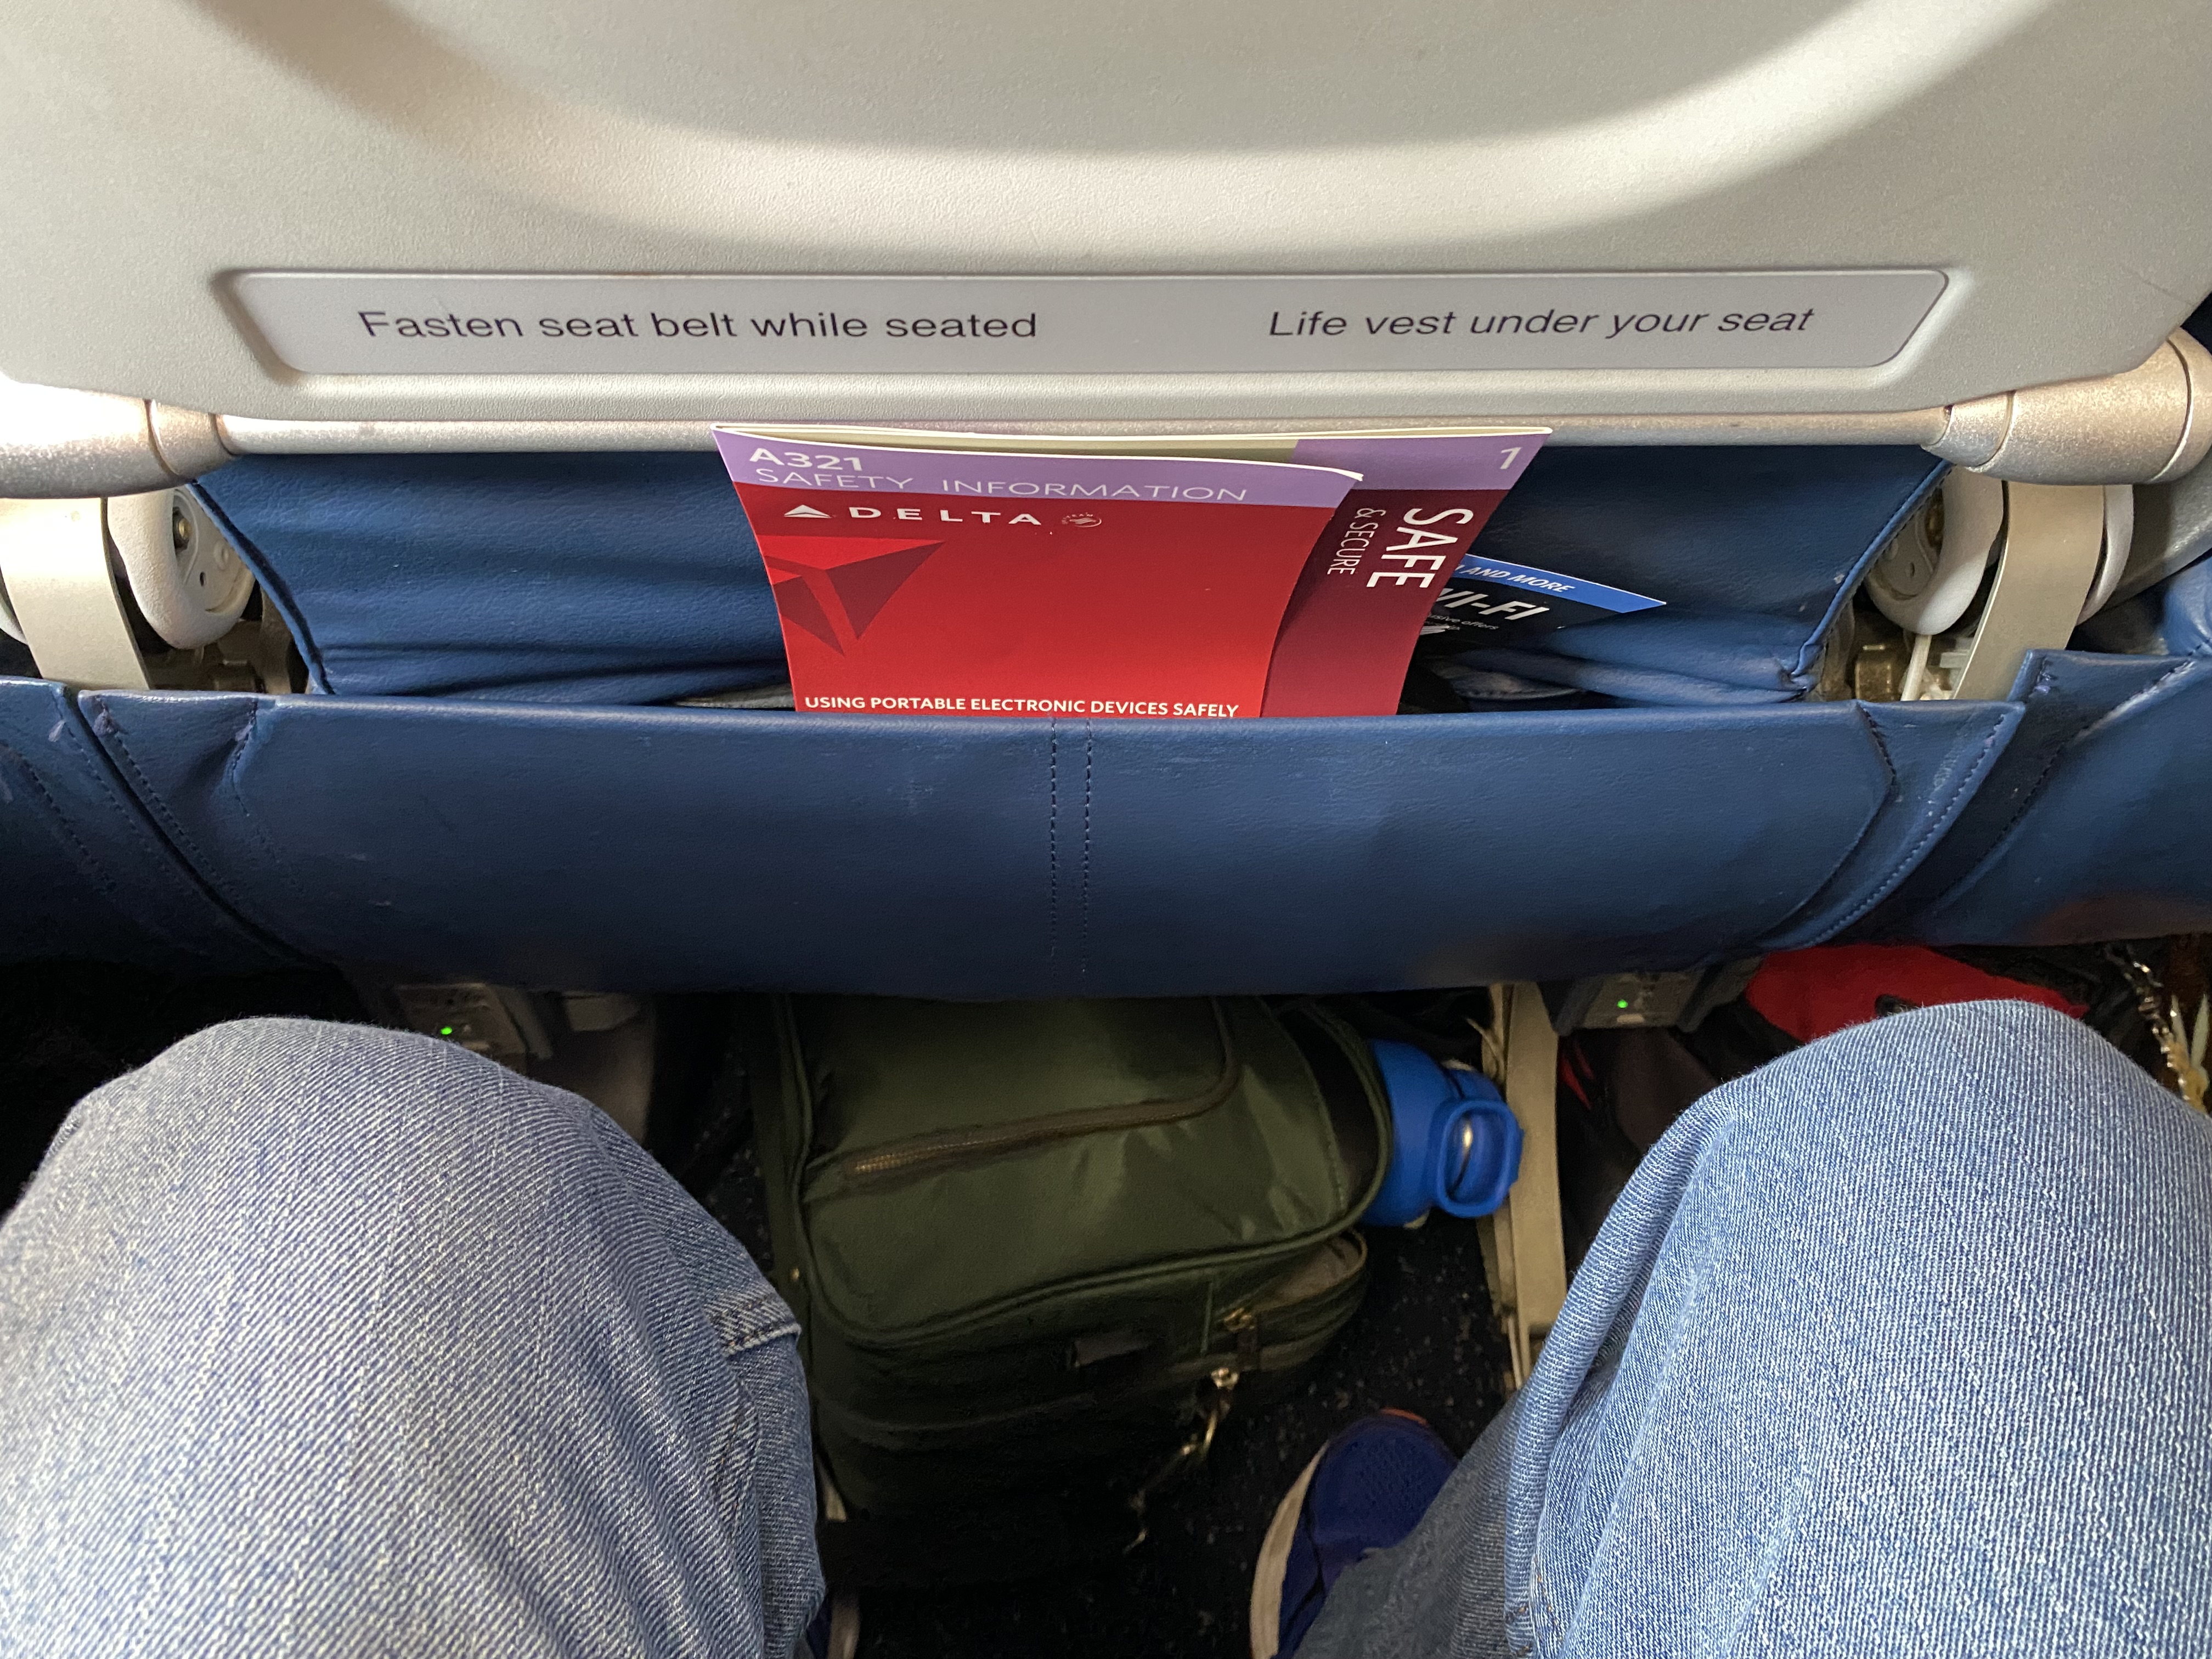 a seat belt with a sign and luggage in the back of a plane